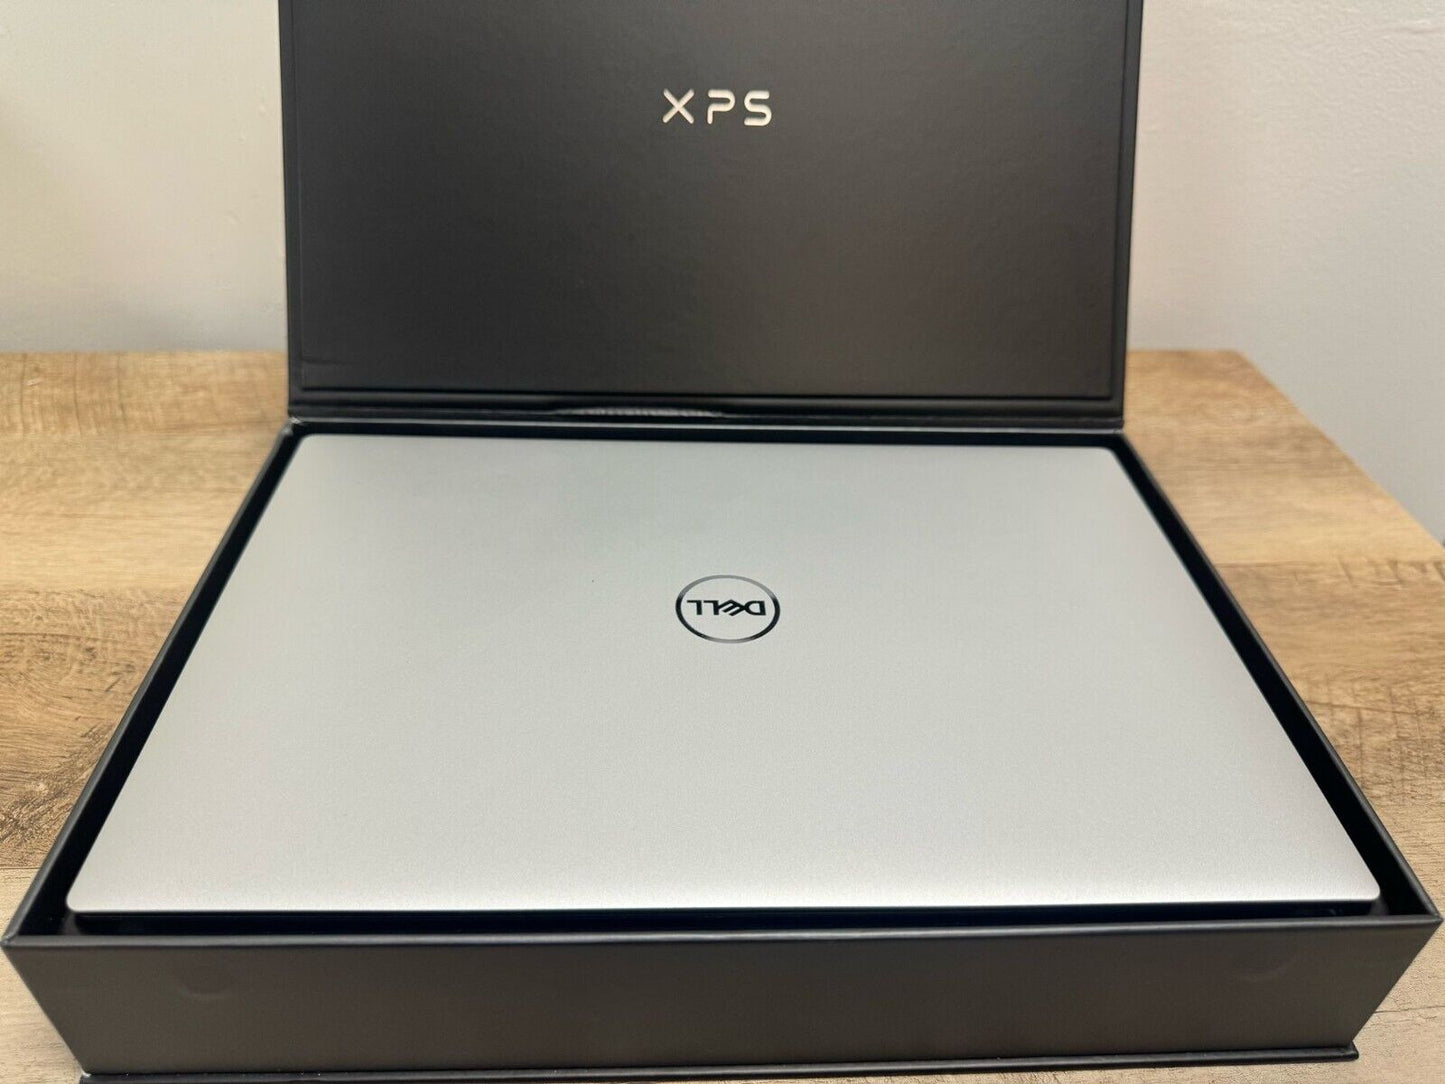 Dell XPS 13 9300 13.4" 1 TB SSD, Intel Core i7-1065G7, 1.30 GHz, 32 GB RAM Touch